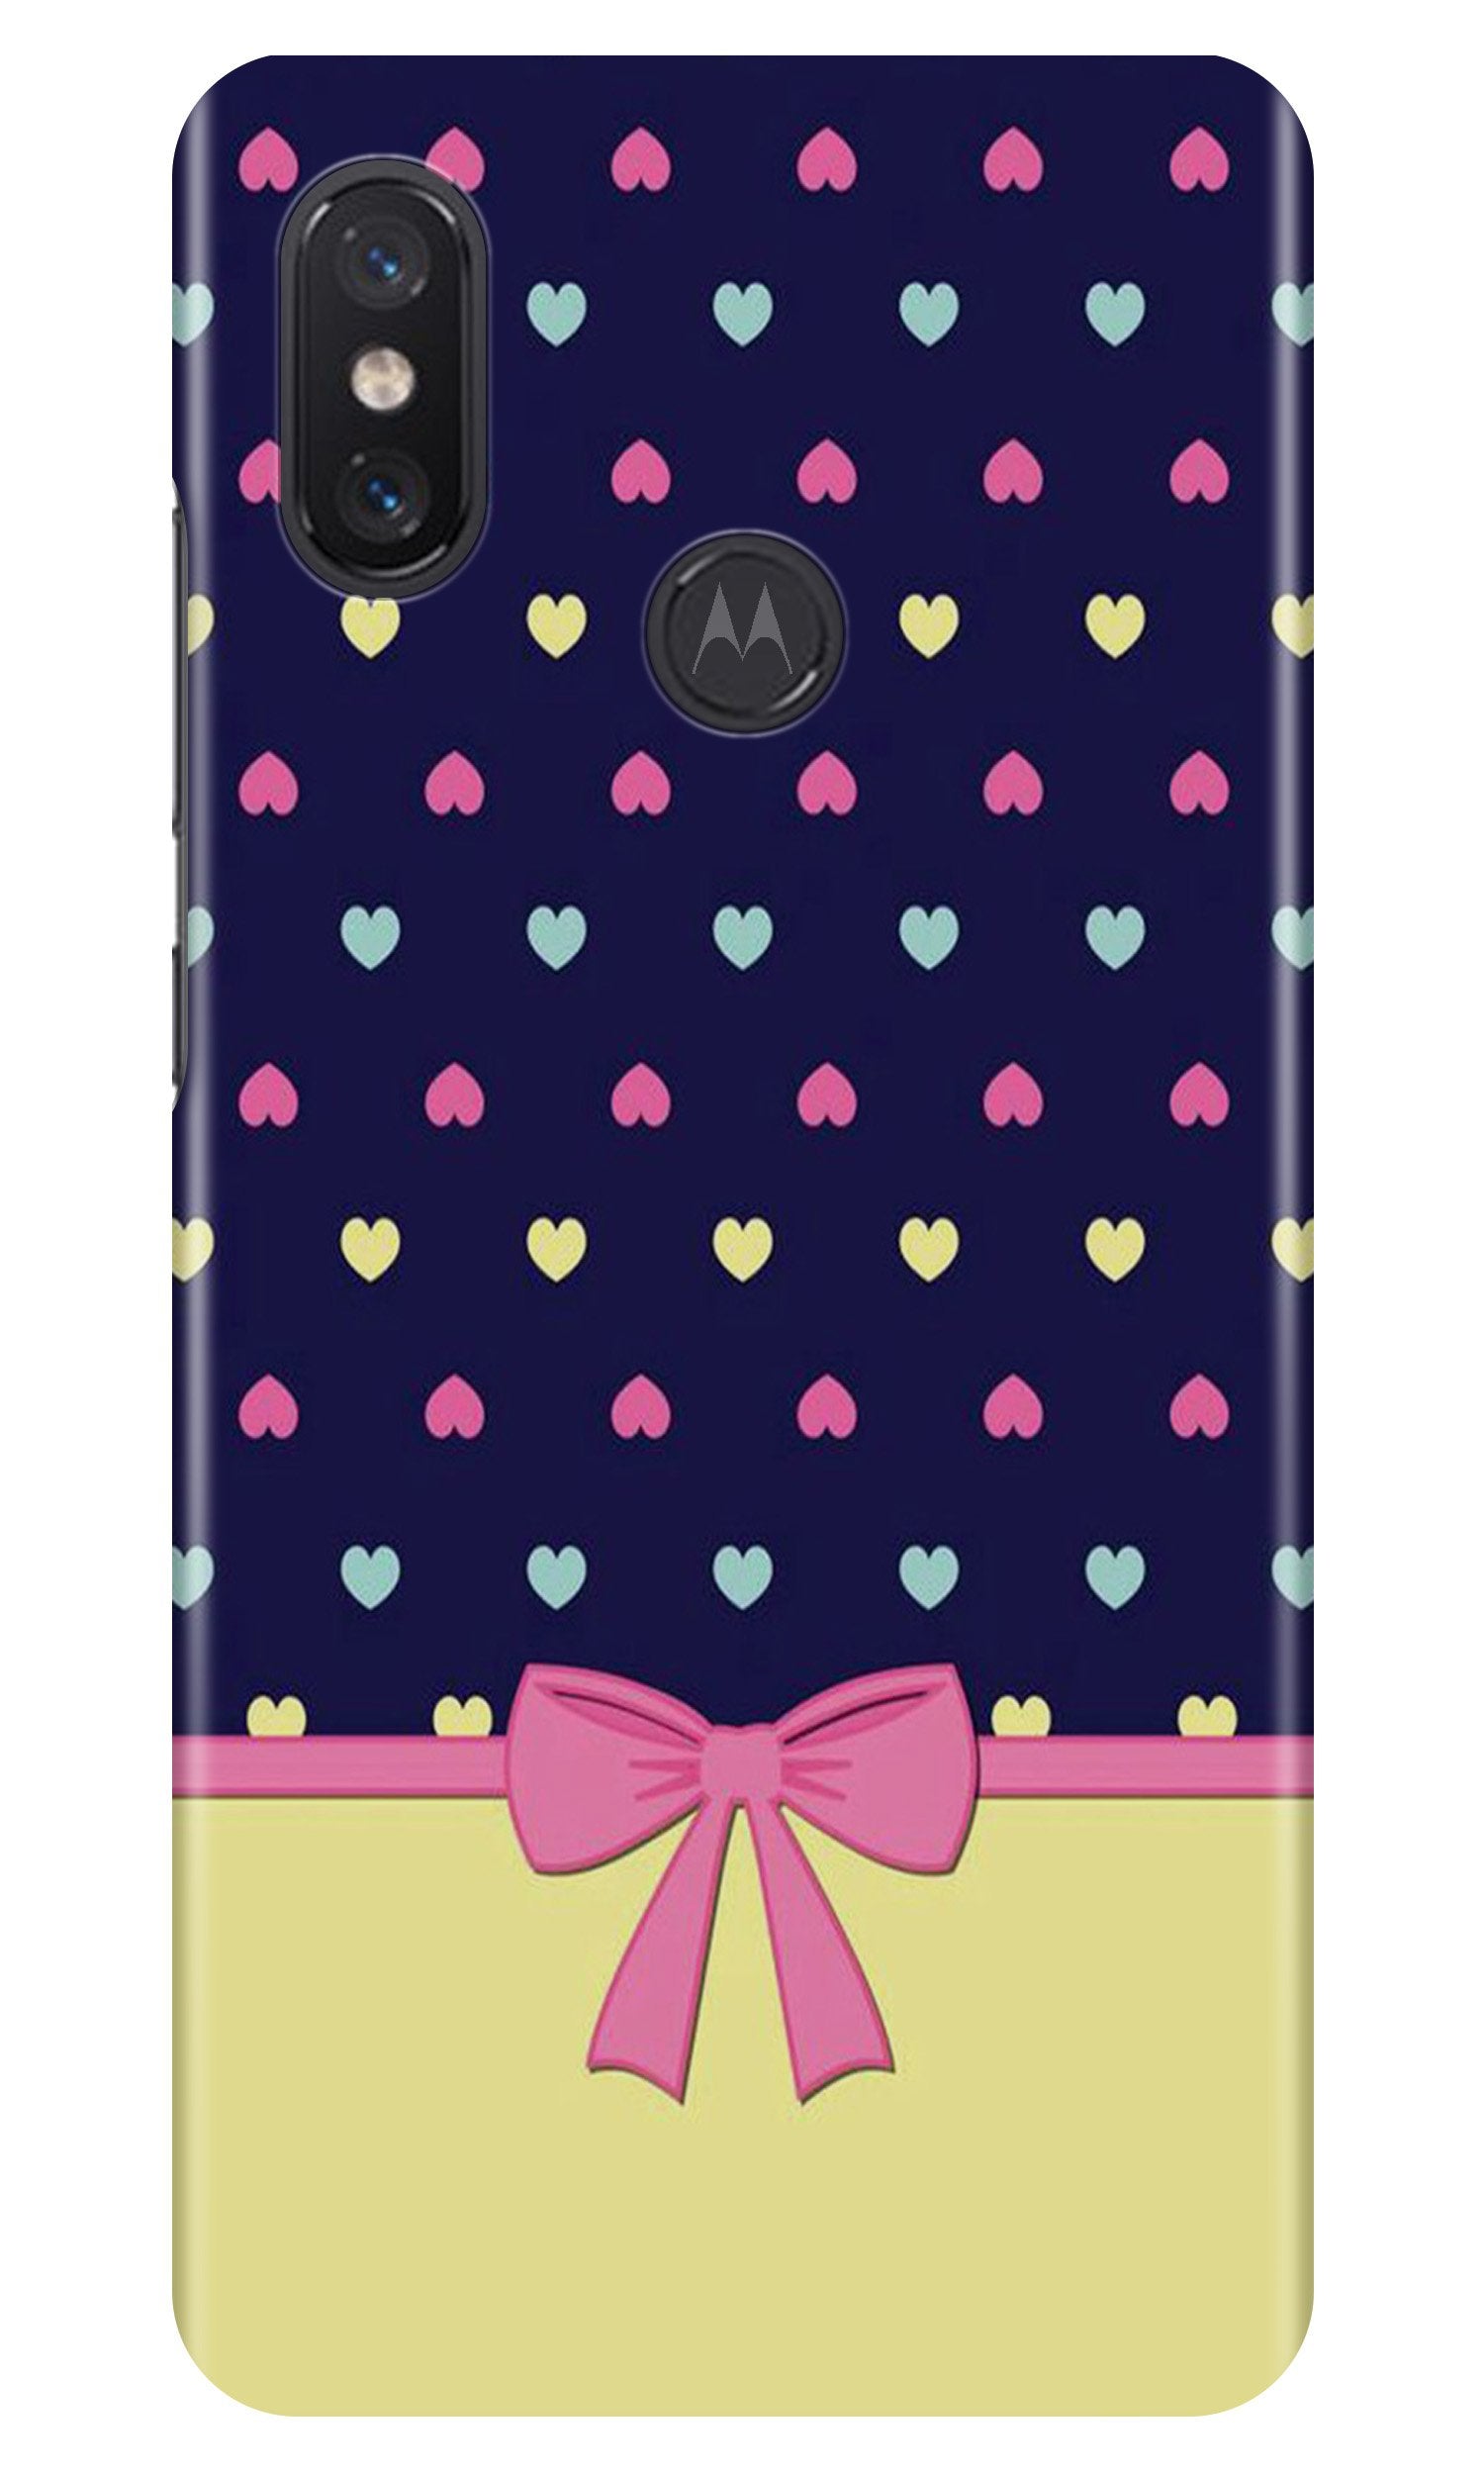 Gift Wrap5 Case for Moto One Power